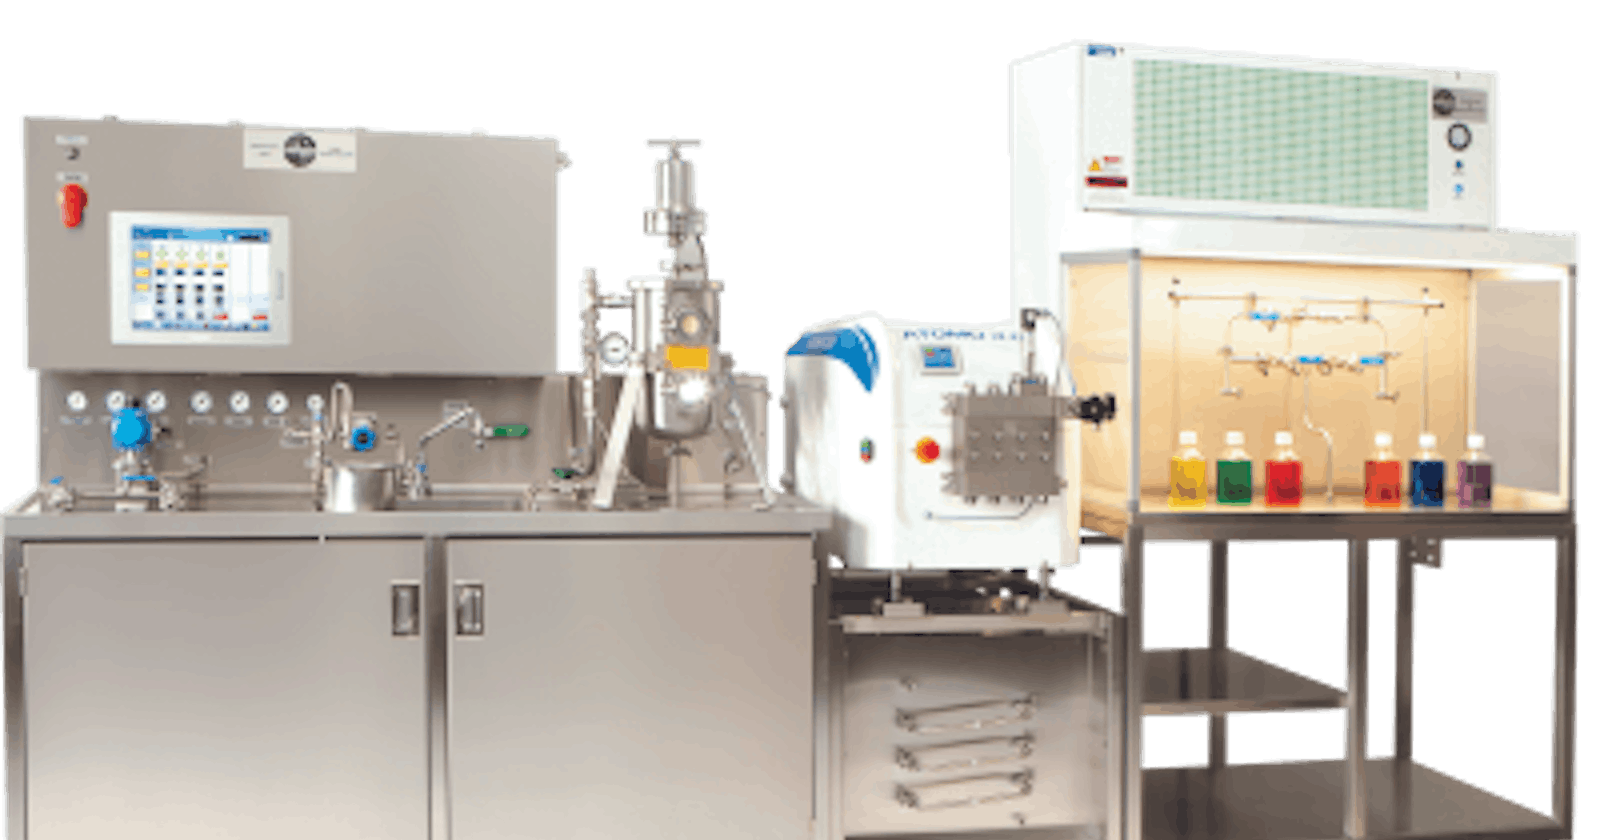 Small Scale Milk Pasteurization Machine: Ensuring Food Safety and Quality